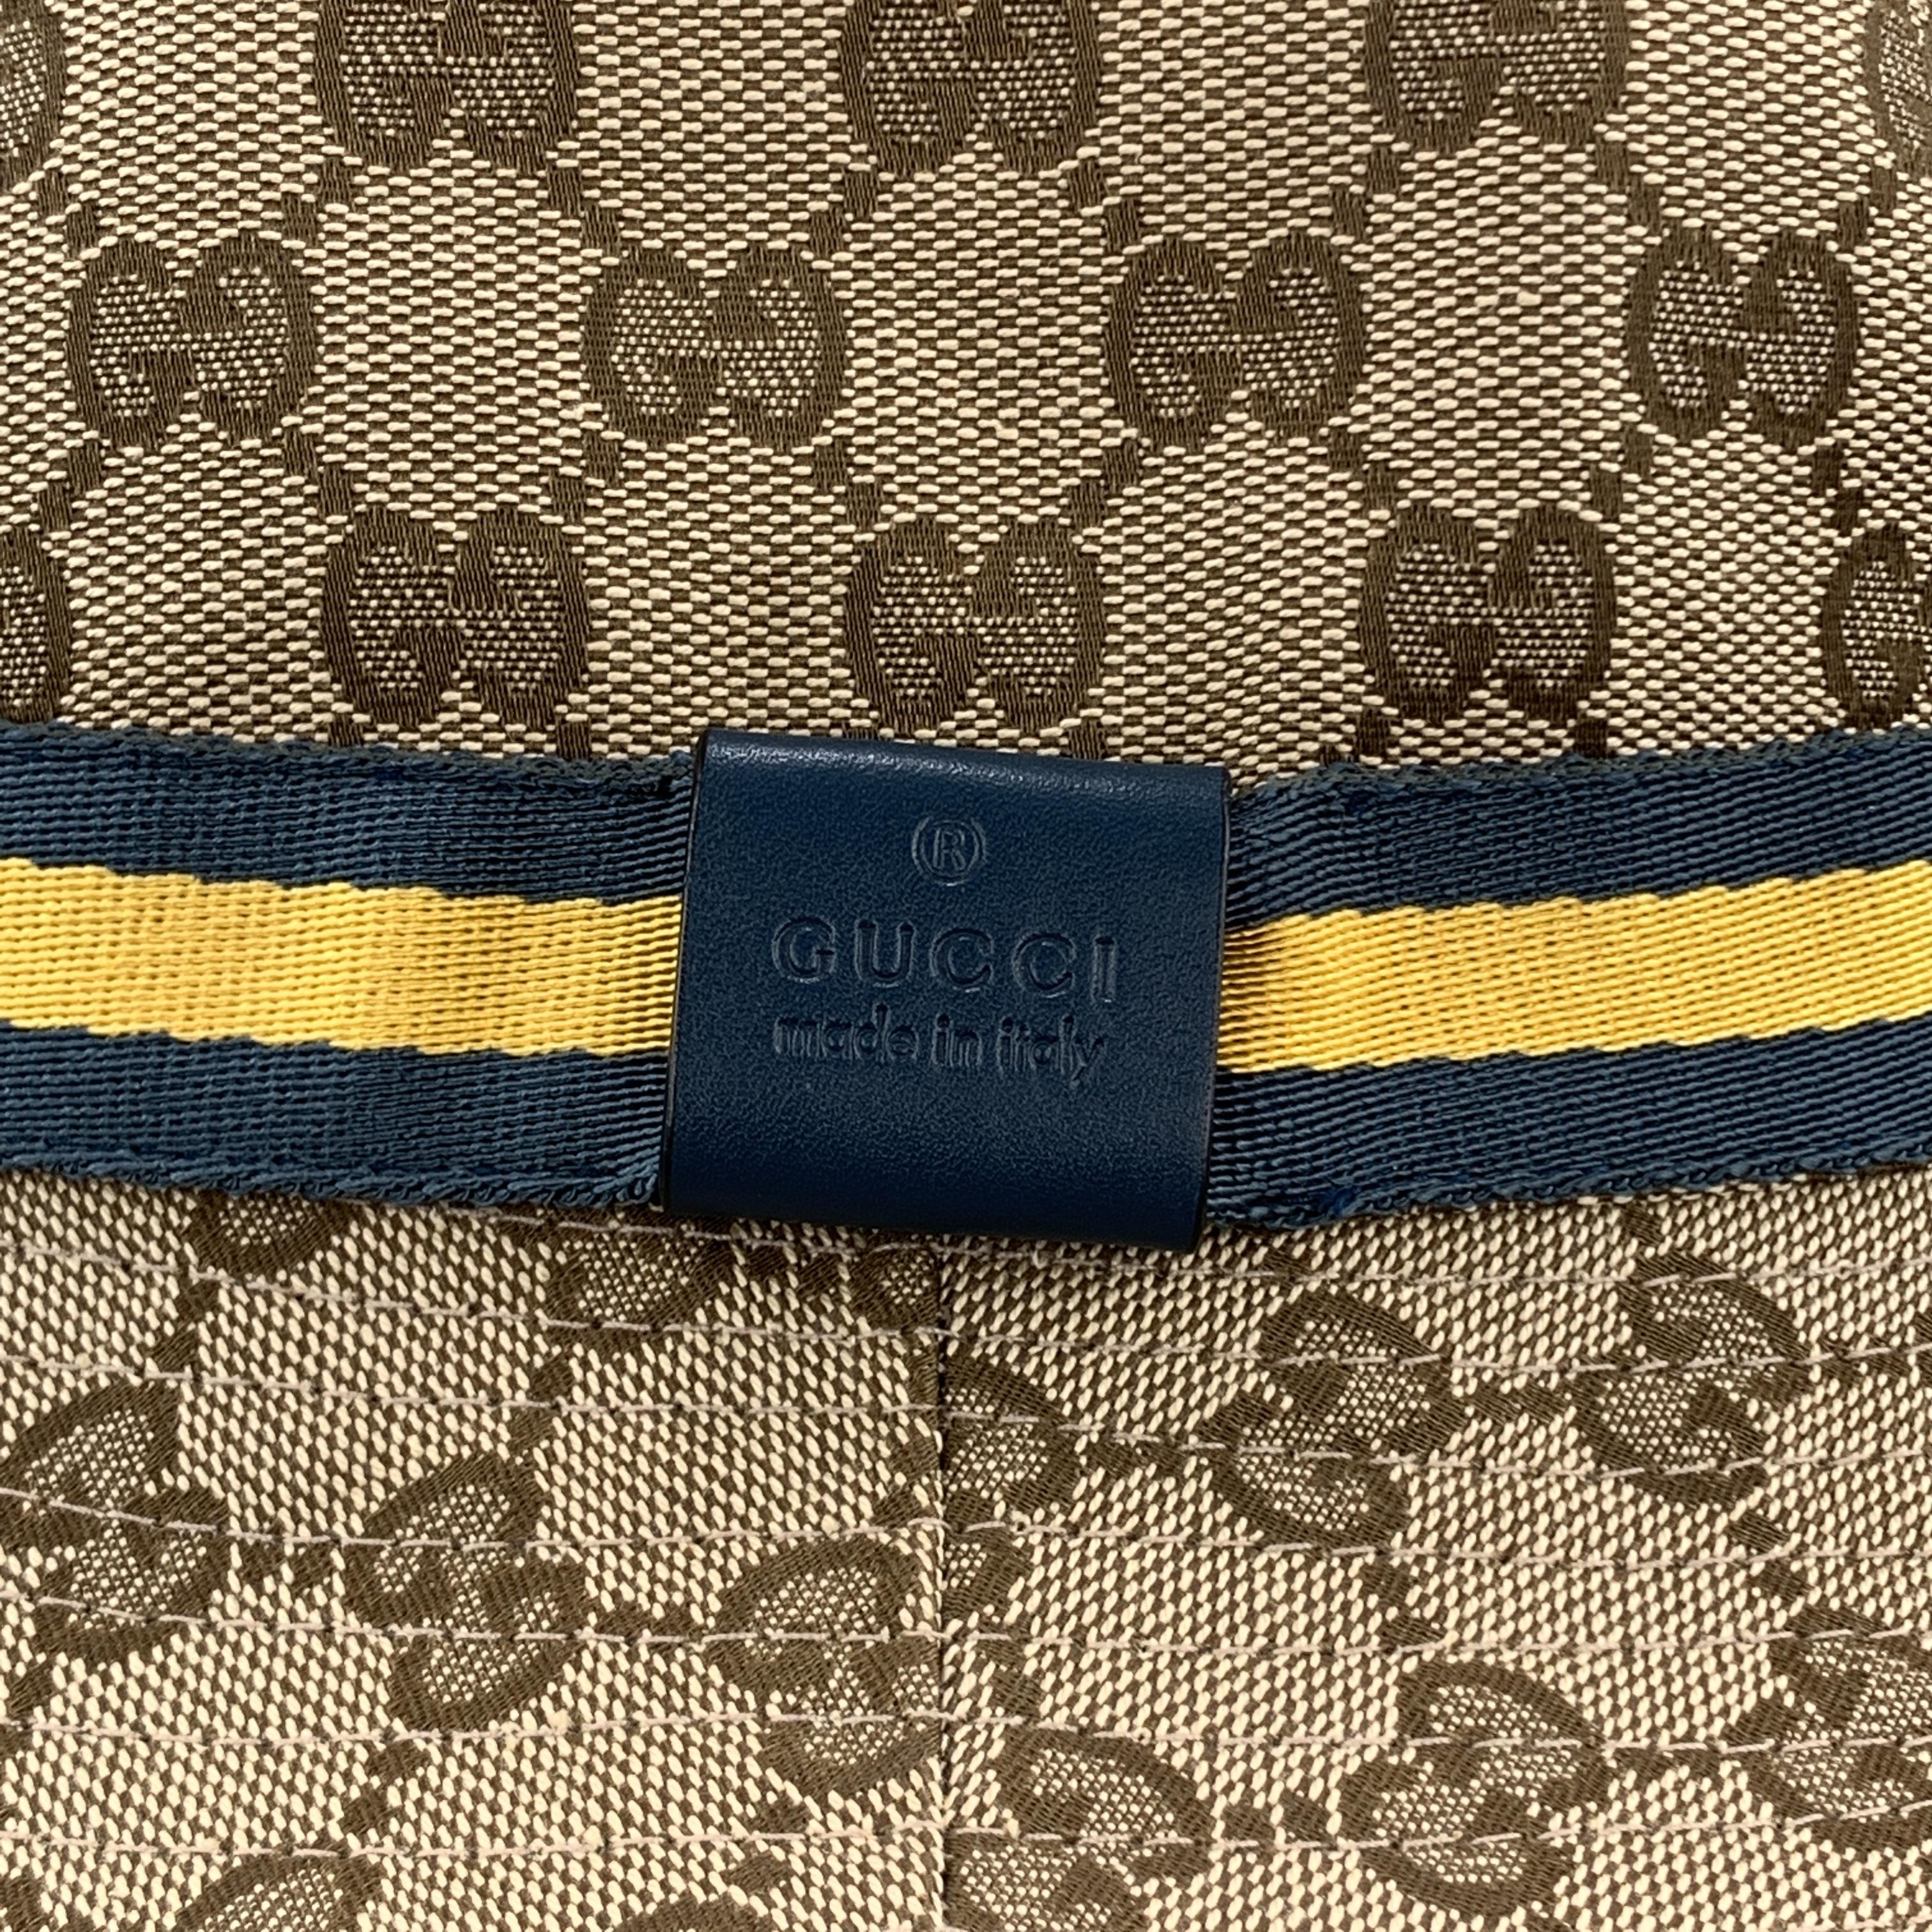 Vintage GUCCI bucket hat comes in classic beige Guccissima monogram canvas with a teal blue and yellow ribbon stripe and leather Logo embossed label. Made in Italy.

Excellent Pre-Owned Condition.
Marked: L

Measurements:

Opening: 22 in.
Brim: 2